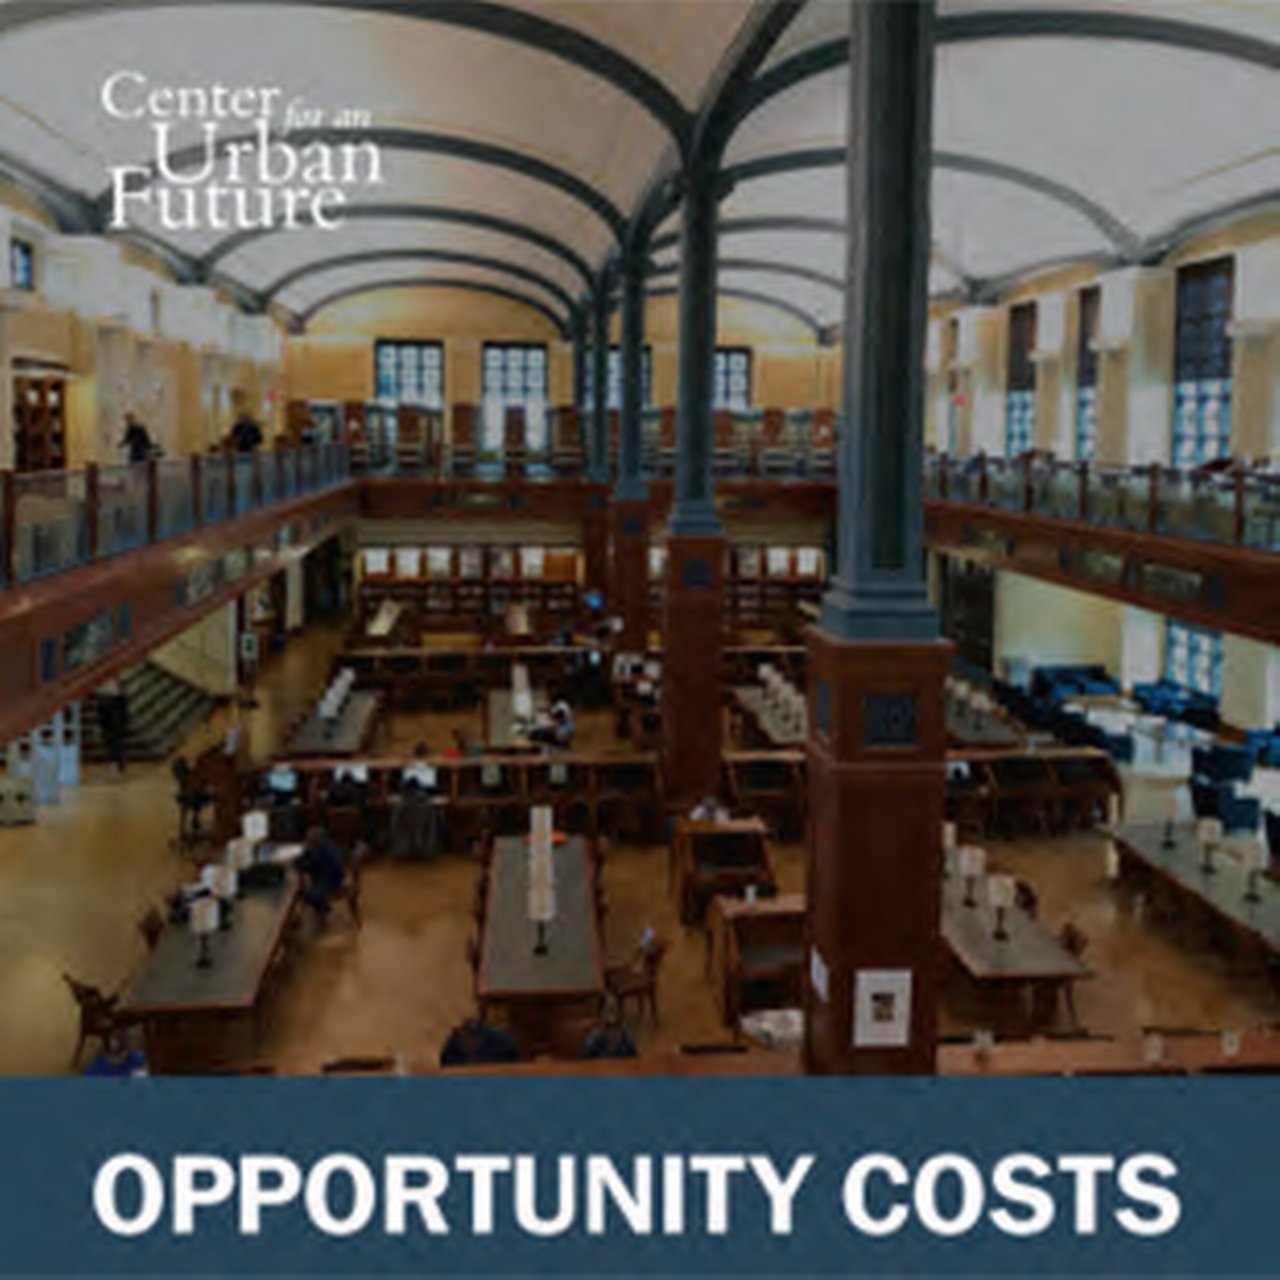 Opportunity costs